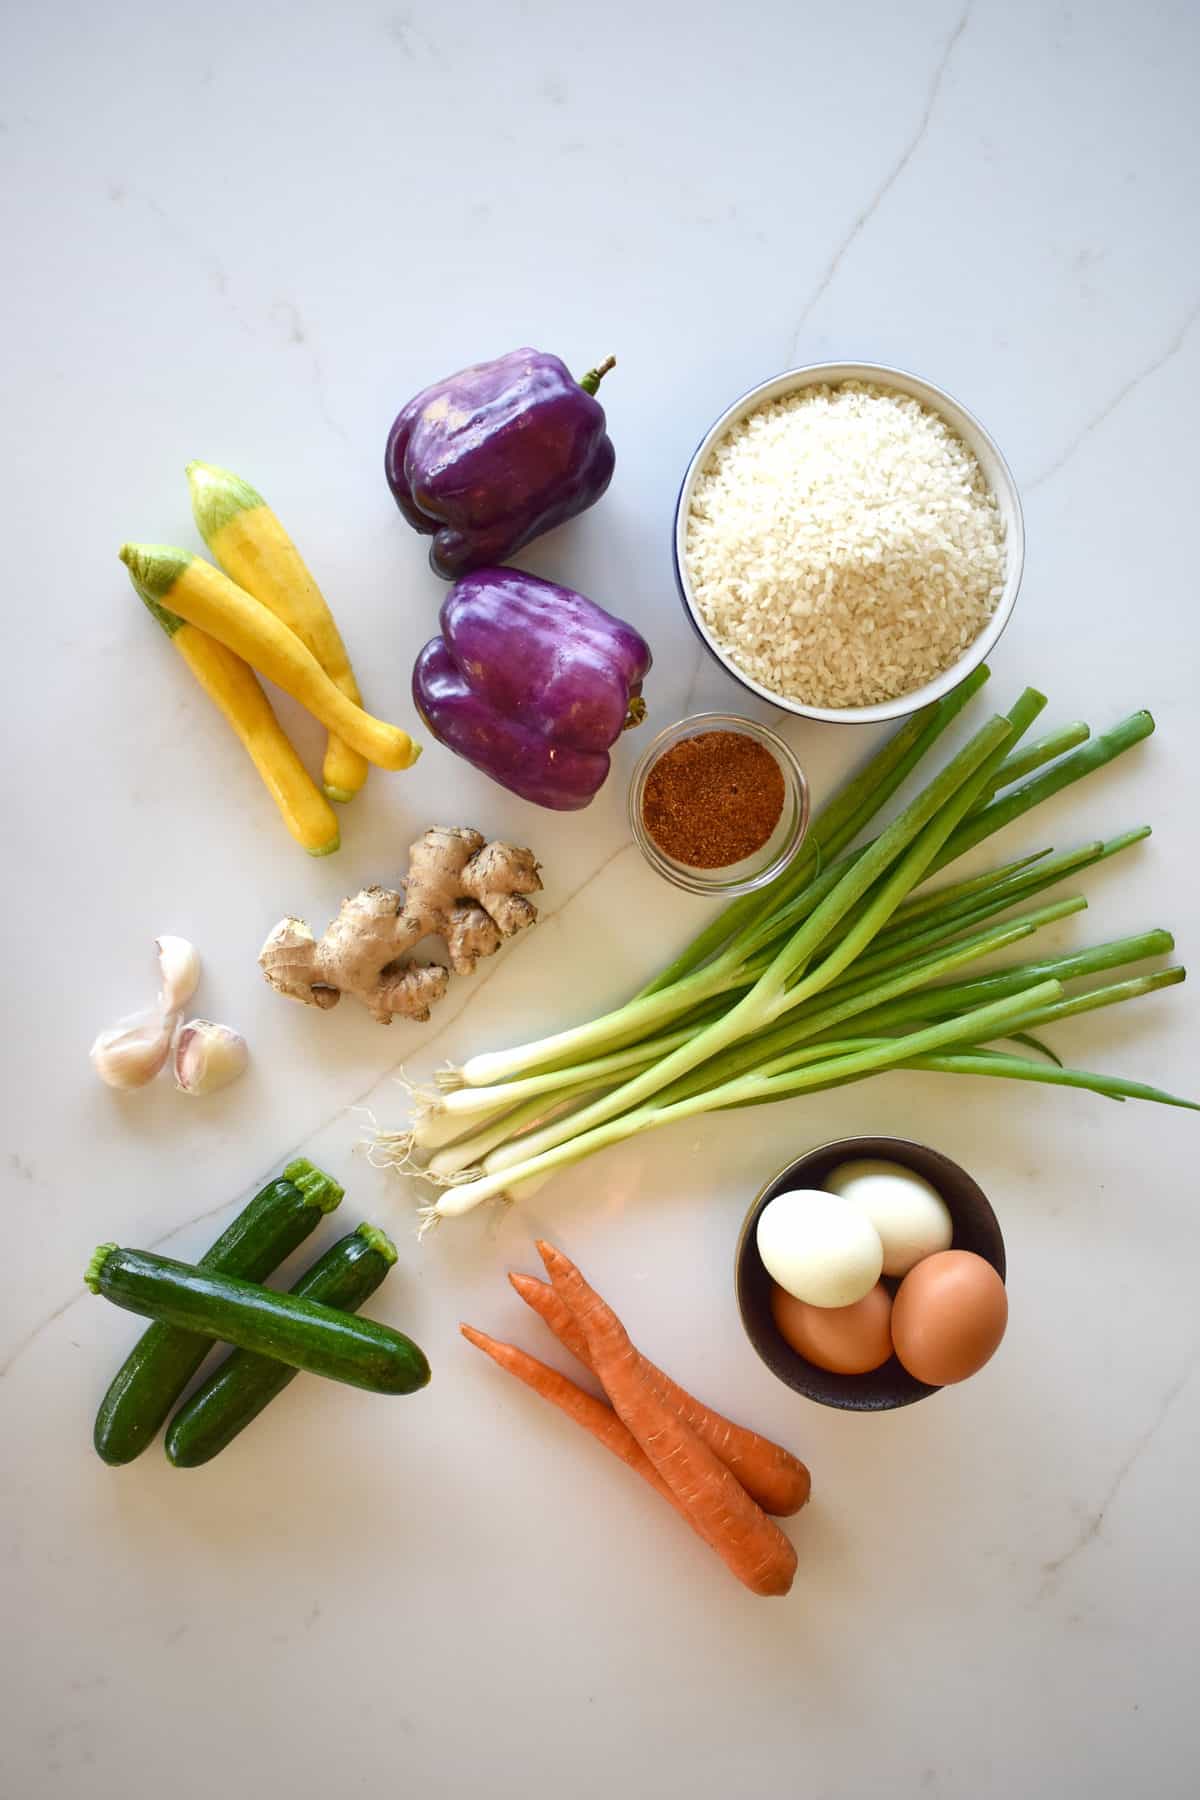 vegetables: green onions, rice, peppers, ginger, zucchini, carrots and eggs